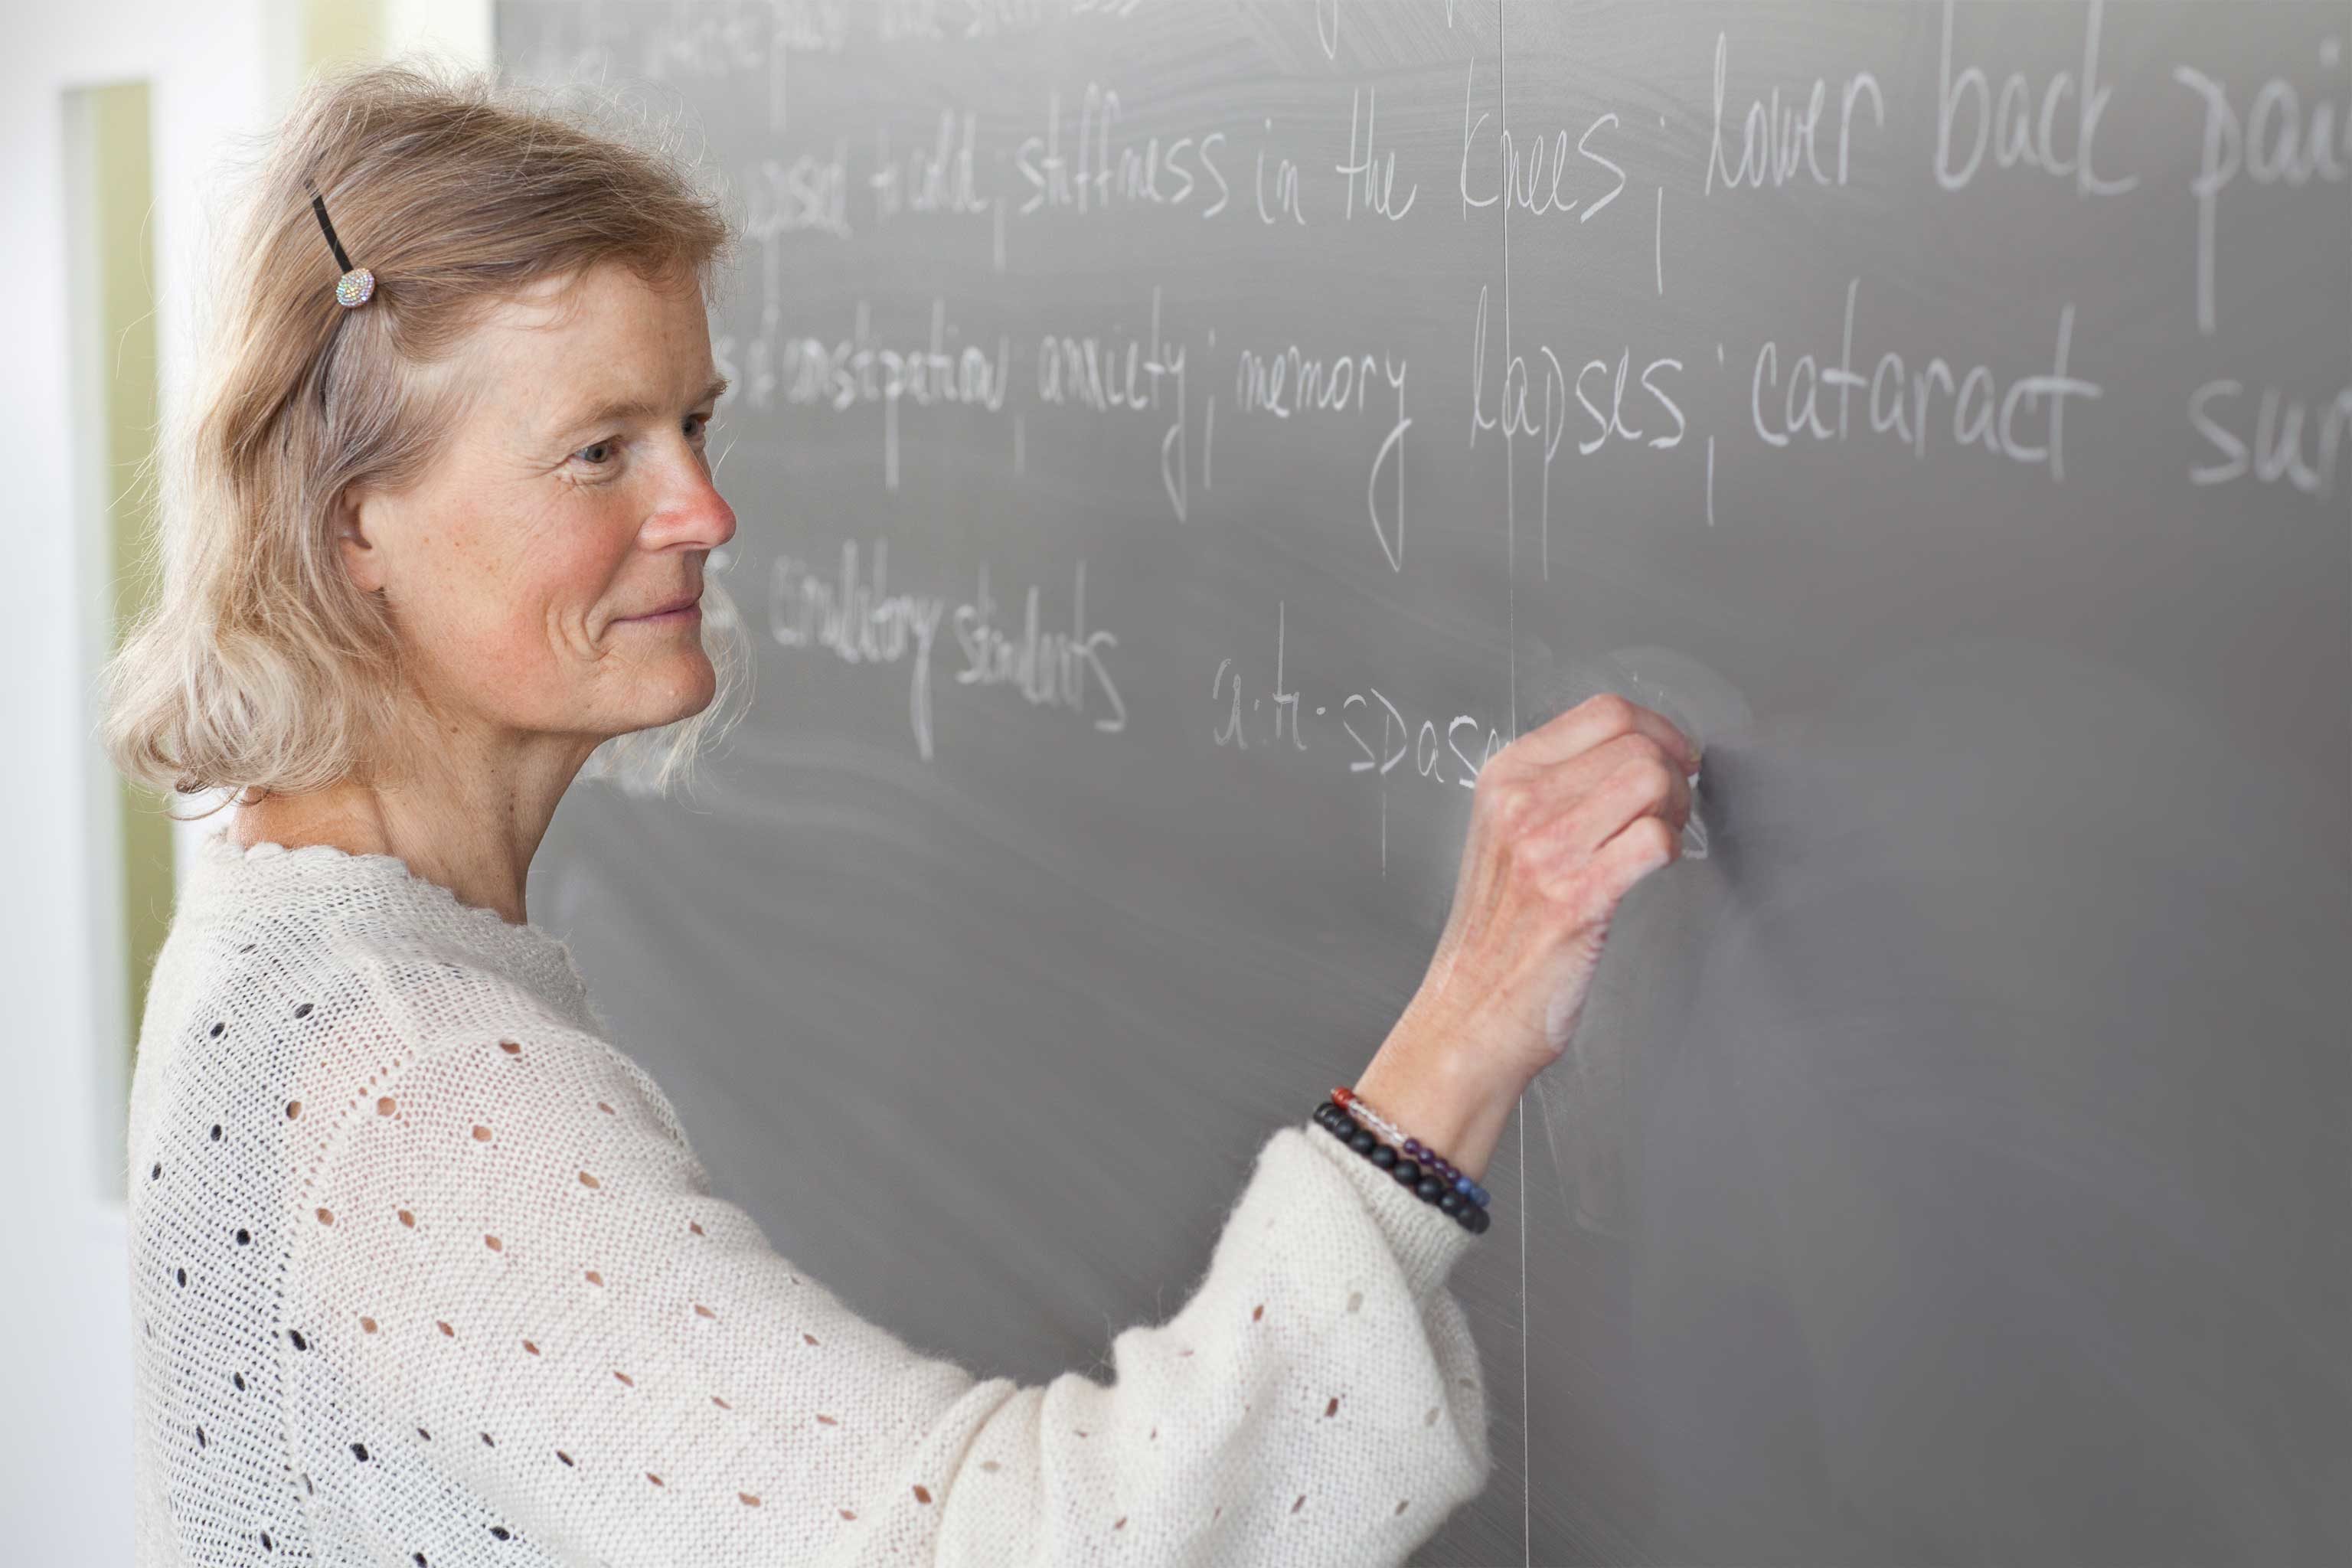 An IHN instructor writing notes on a chalkboard